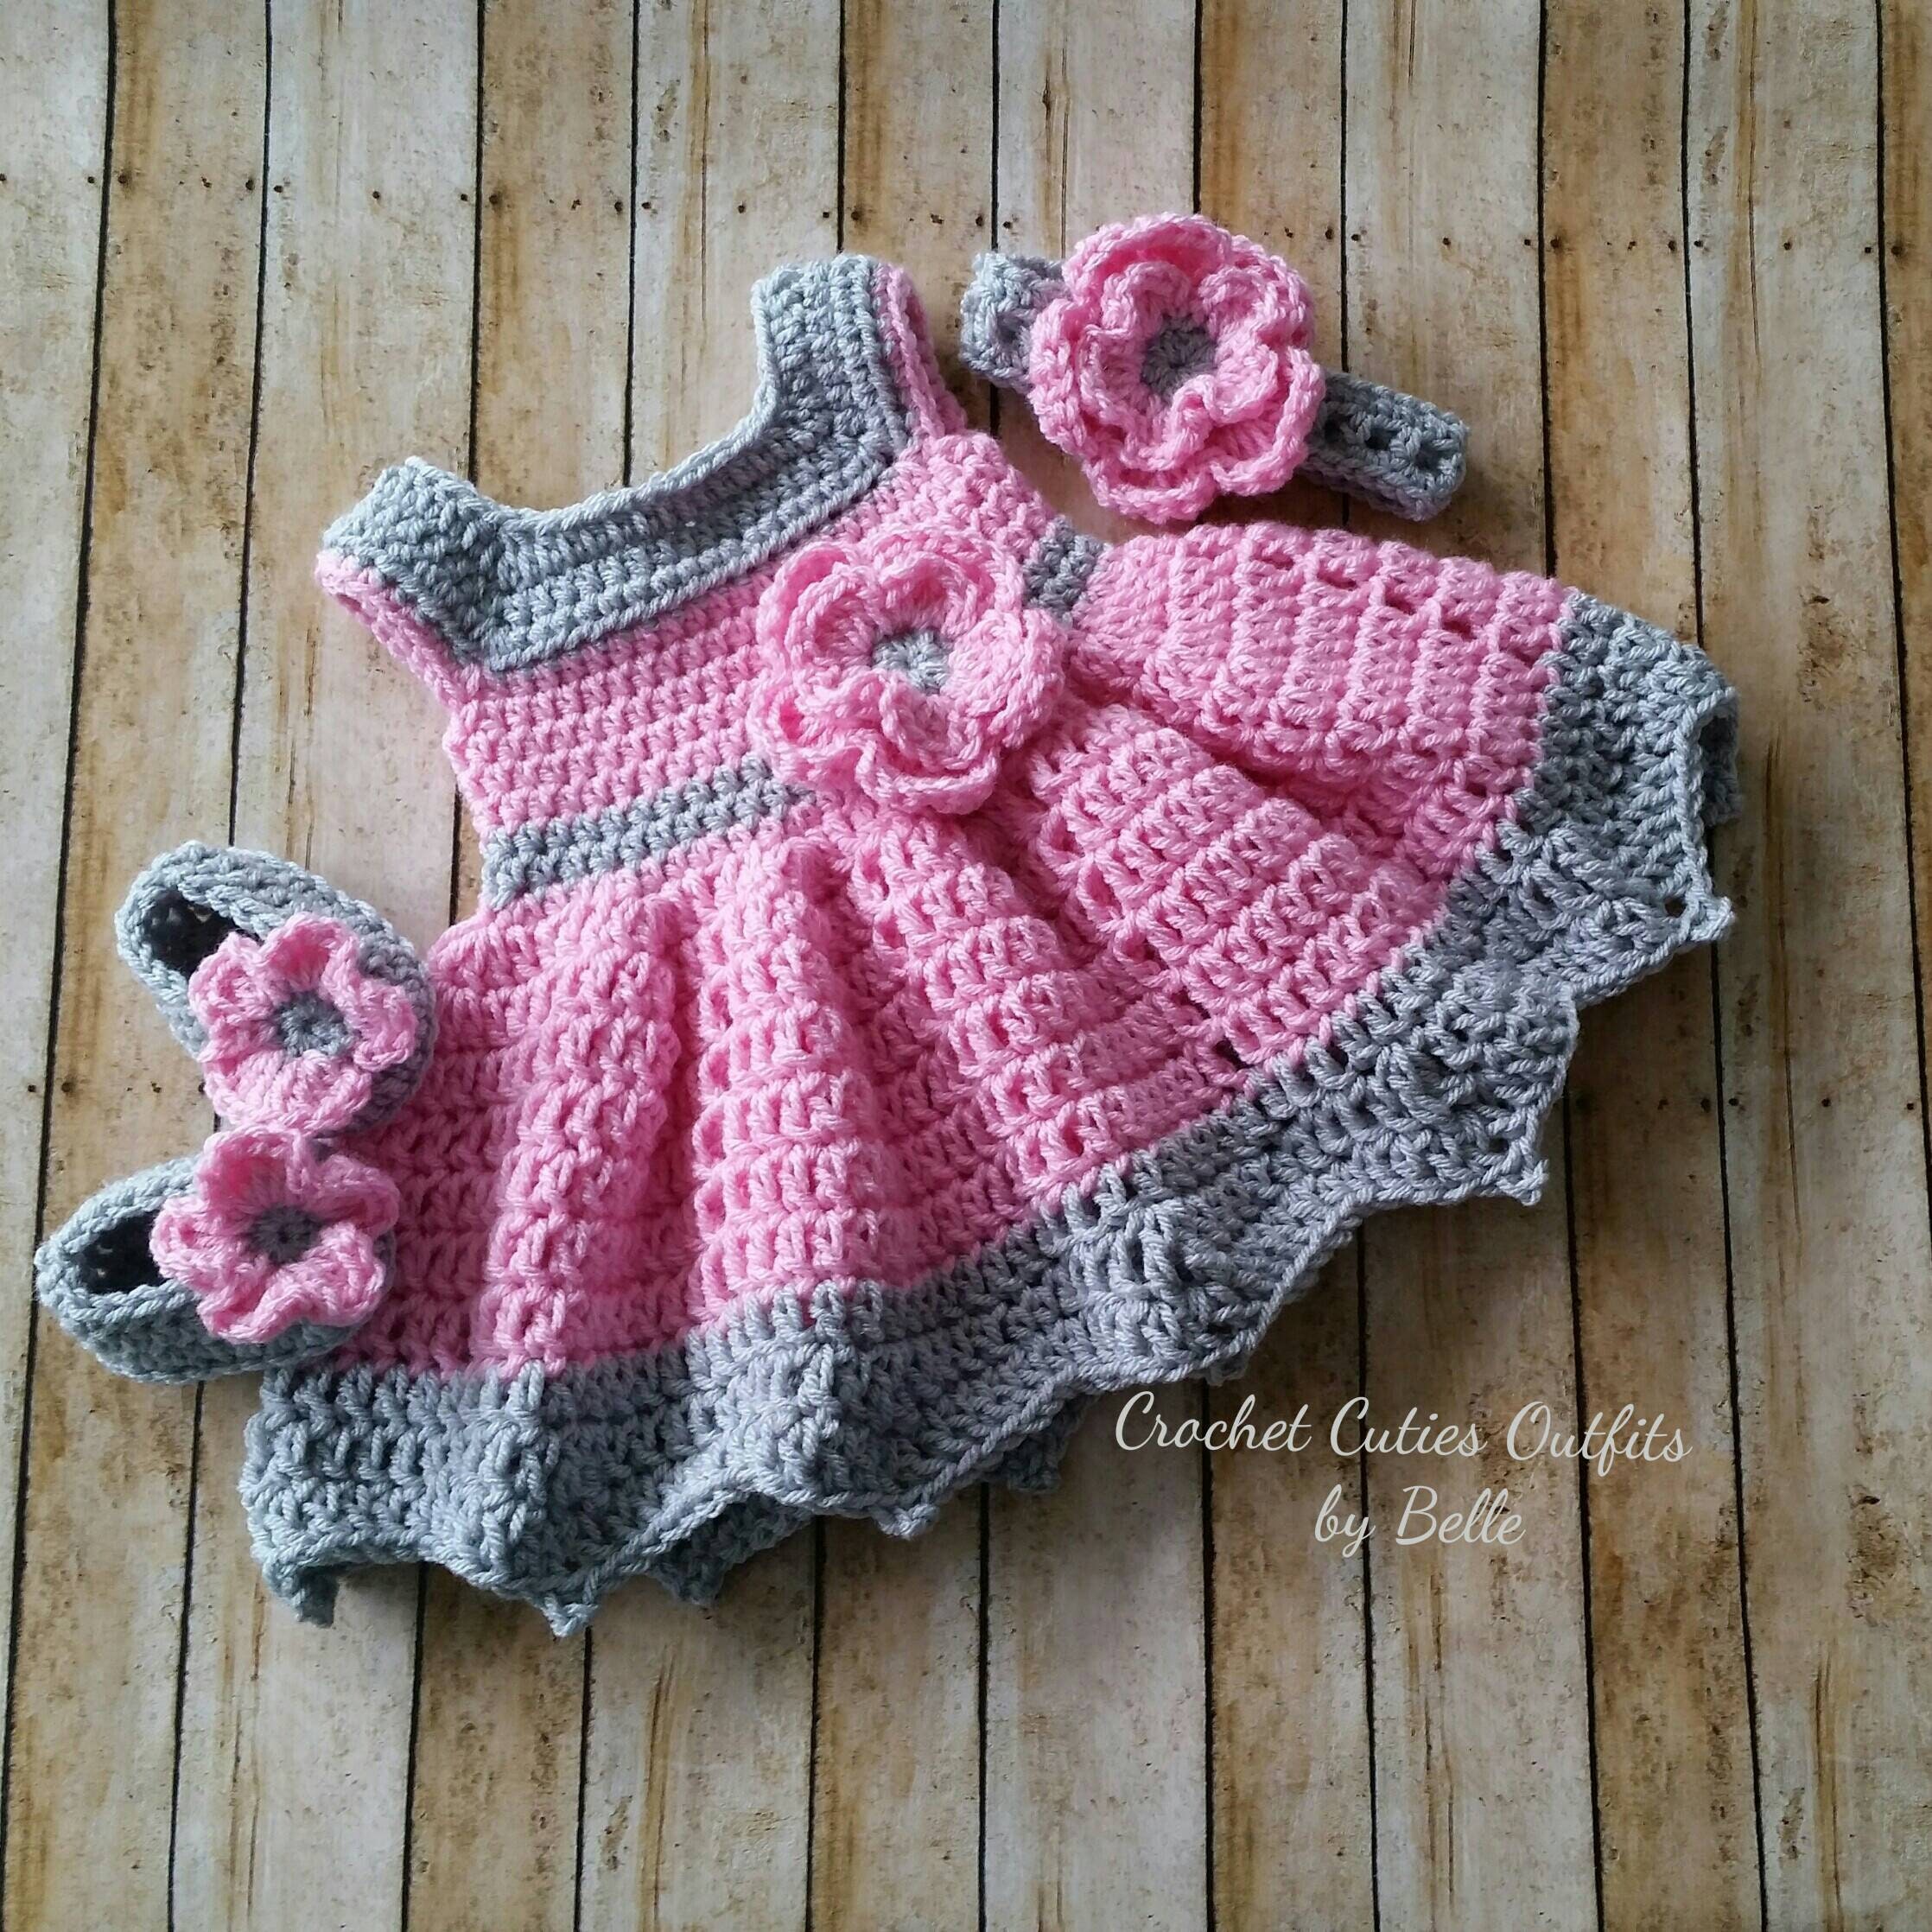 baby dress and shoes